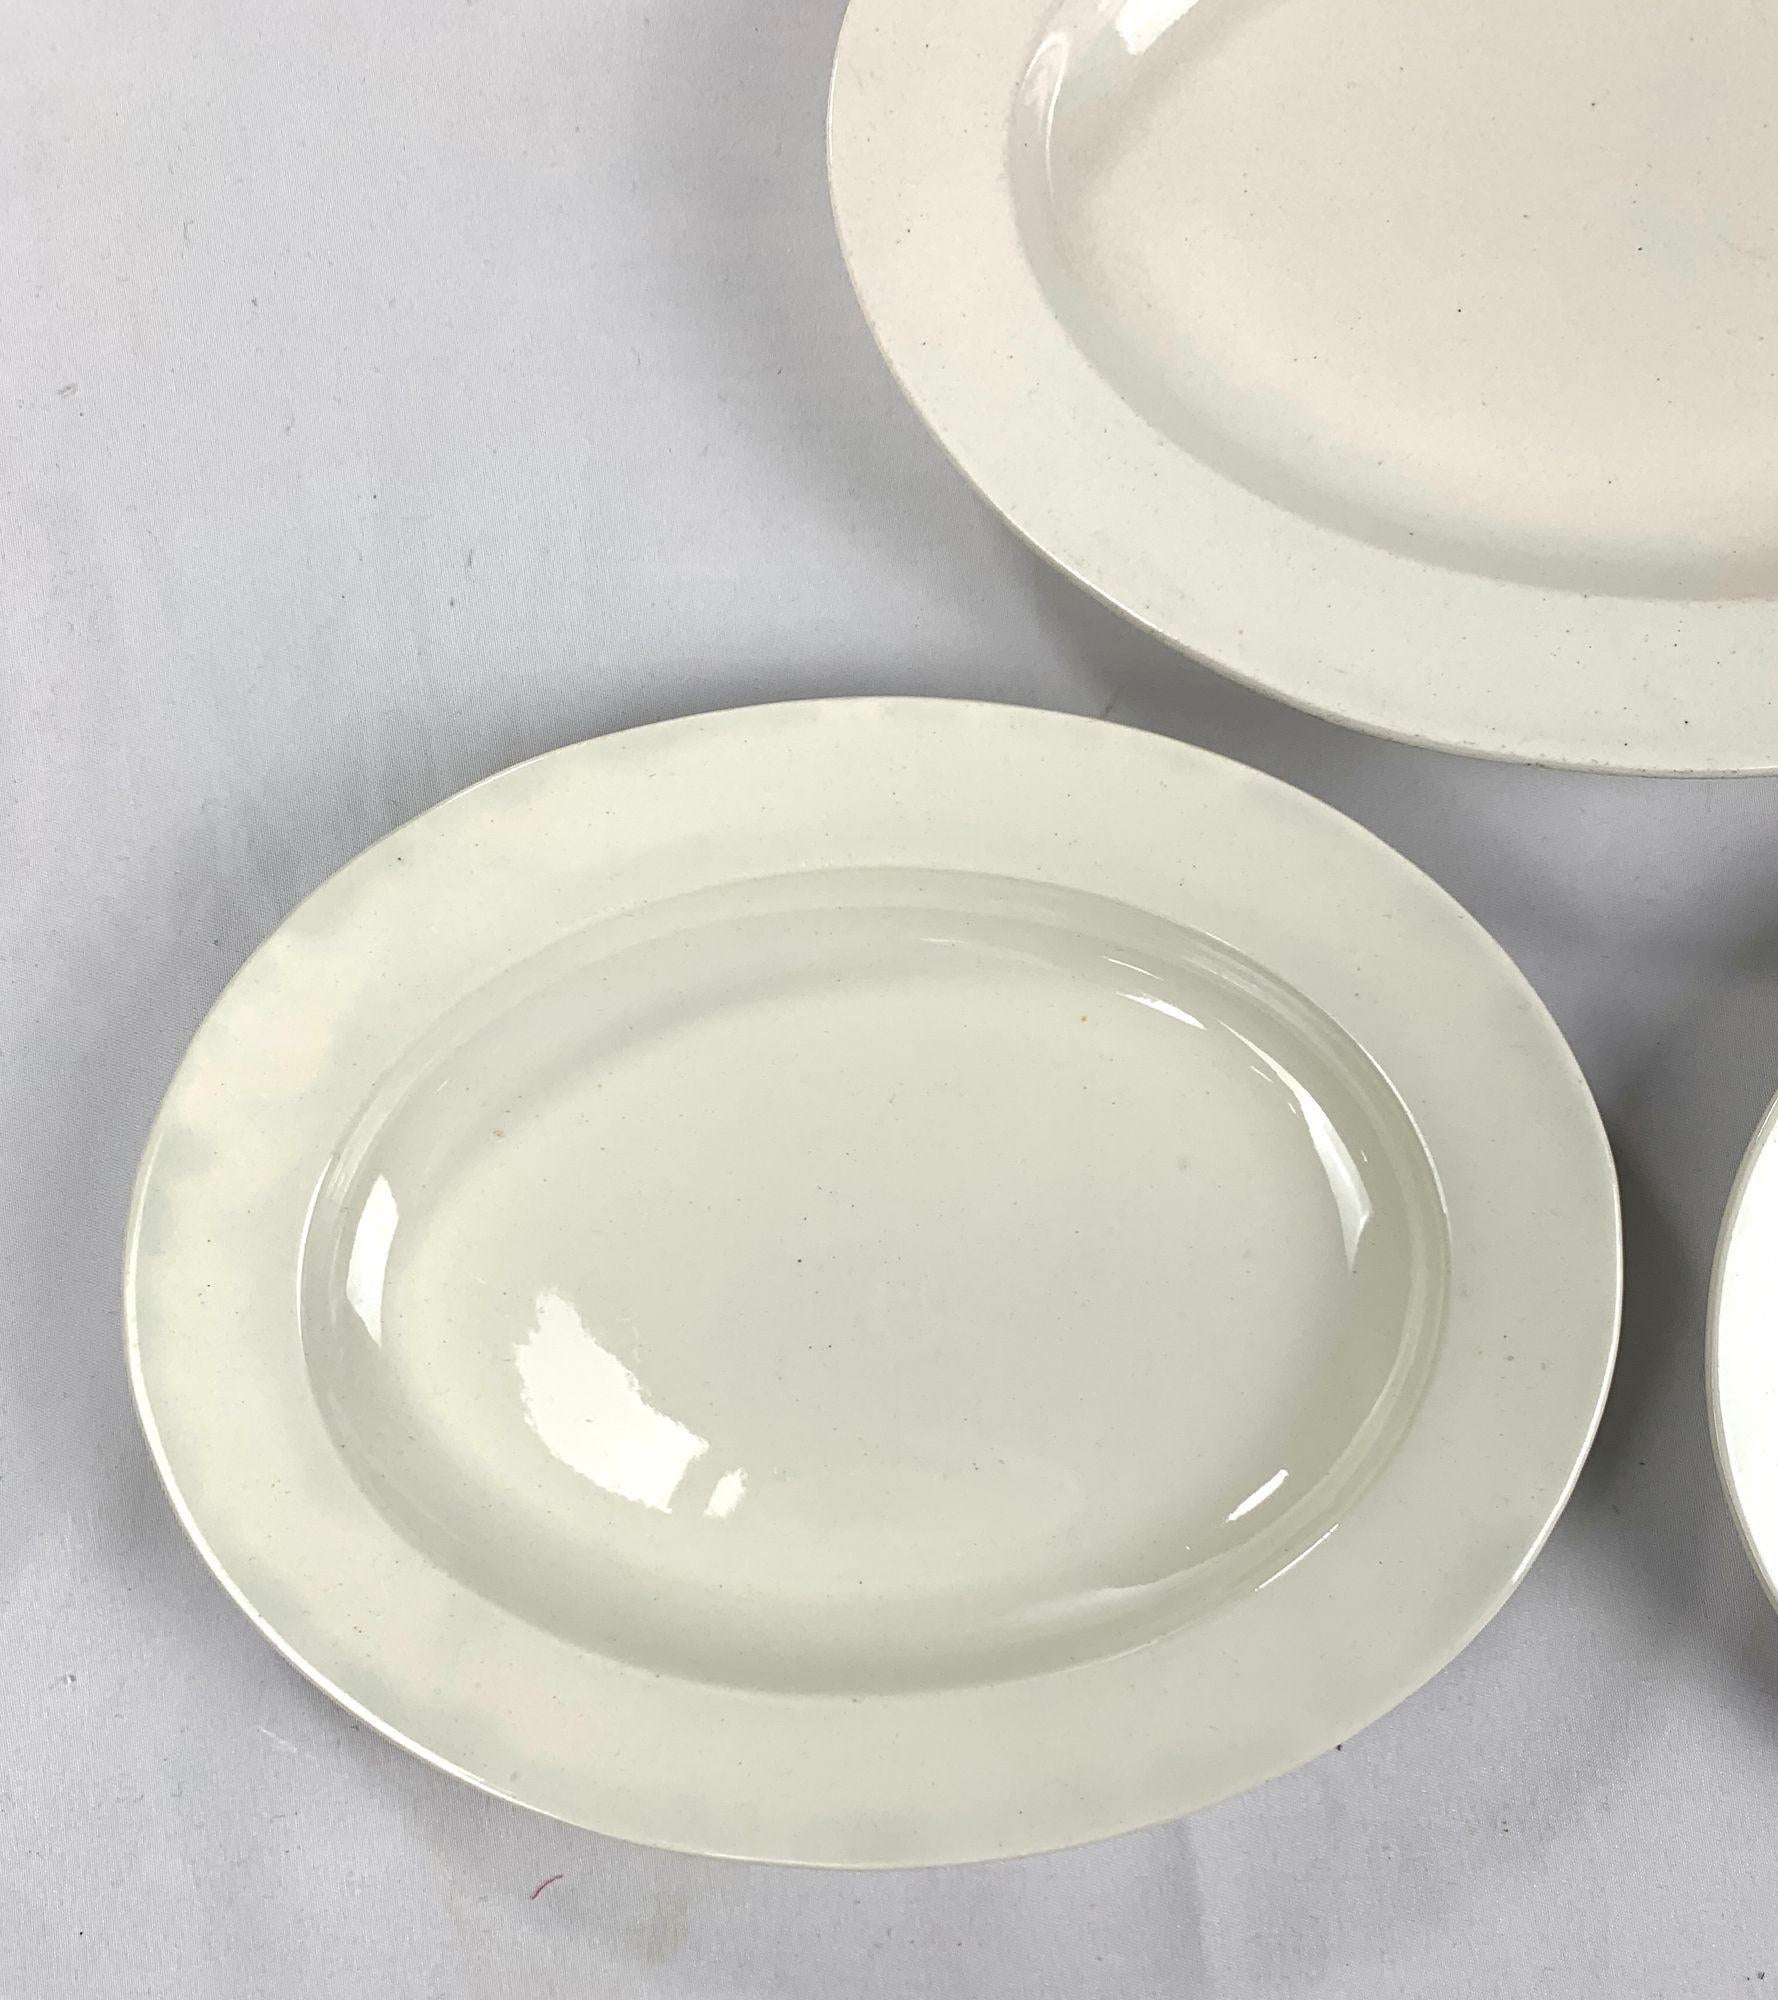 Made by Wedgwood in England circa 1830, this group of three oval dishes is lovely creamware with a simple, elegant design.
Creamware is cream-colored, refined earthenware.
It was created in the mid-1700s by the potters of Staffordshire,